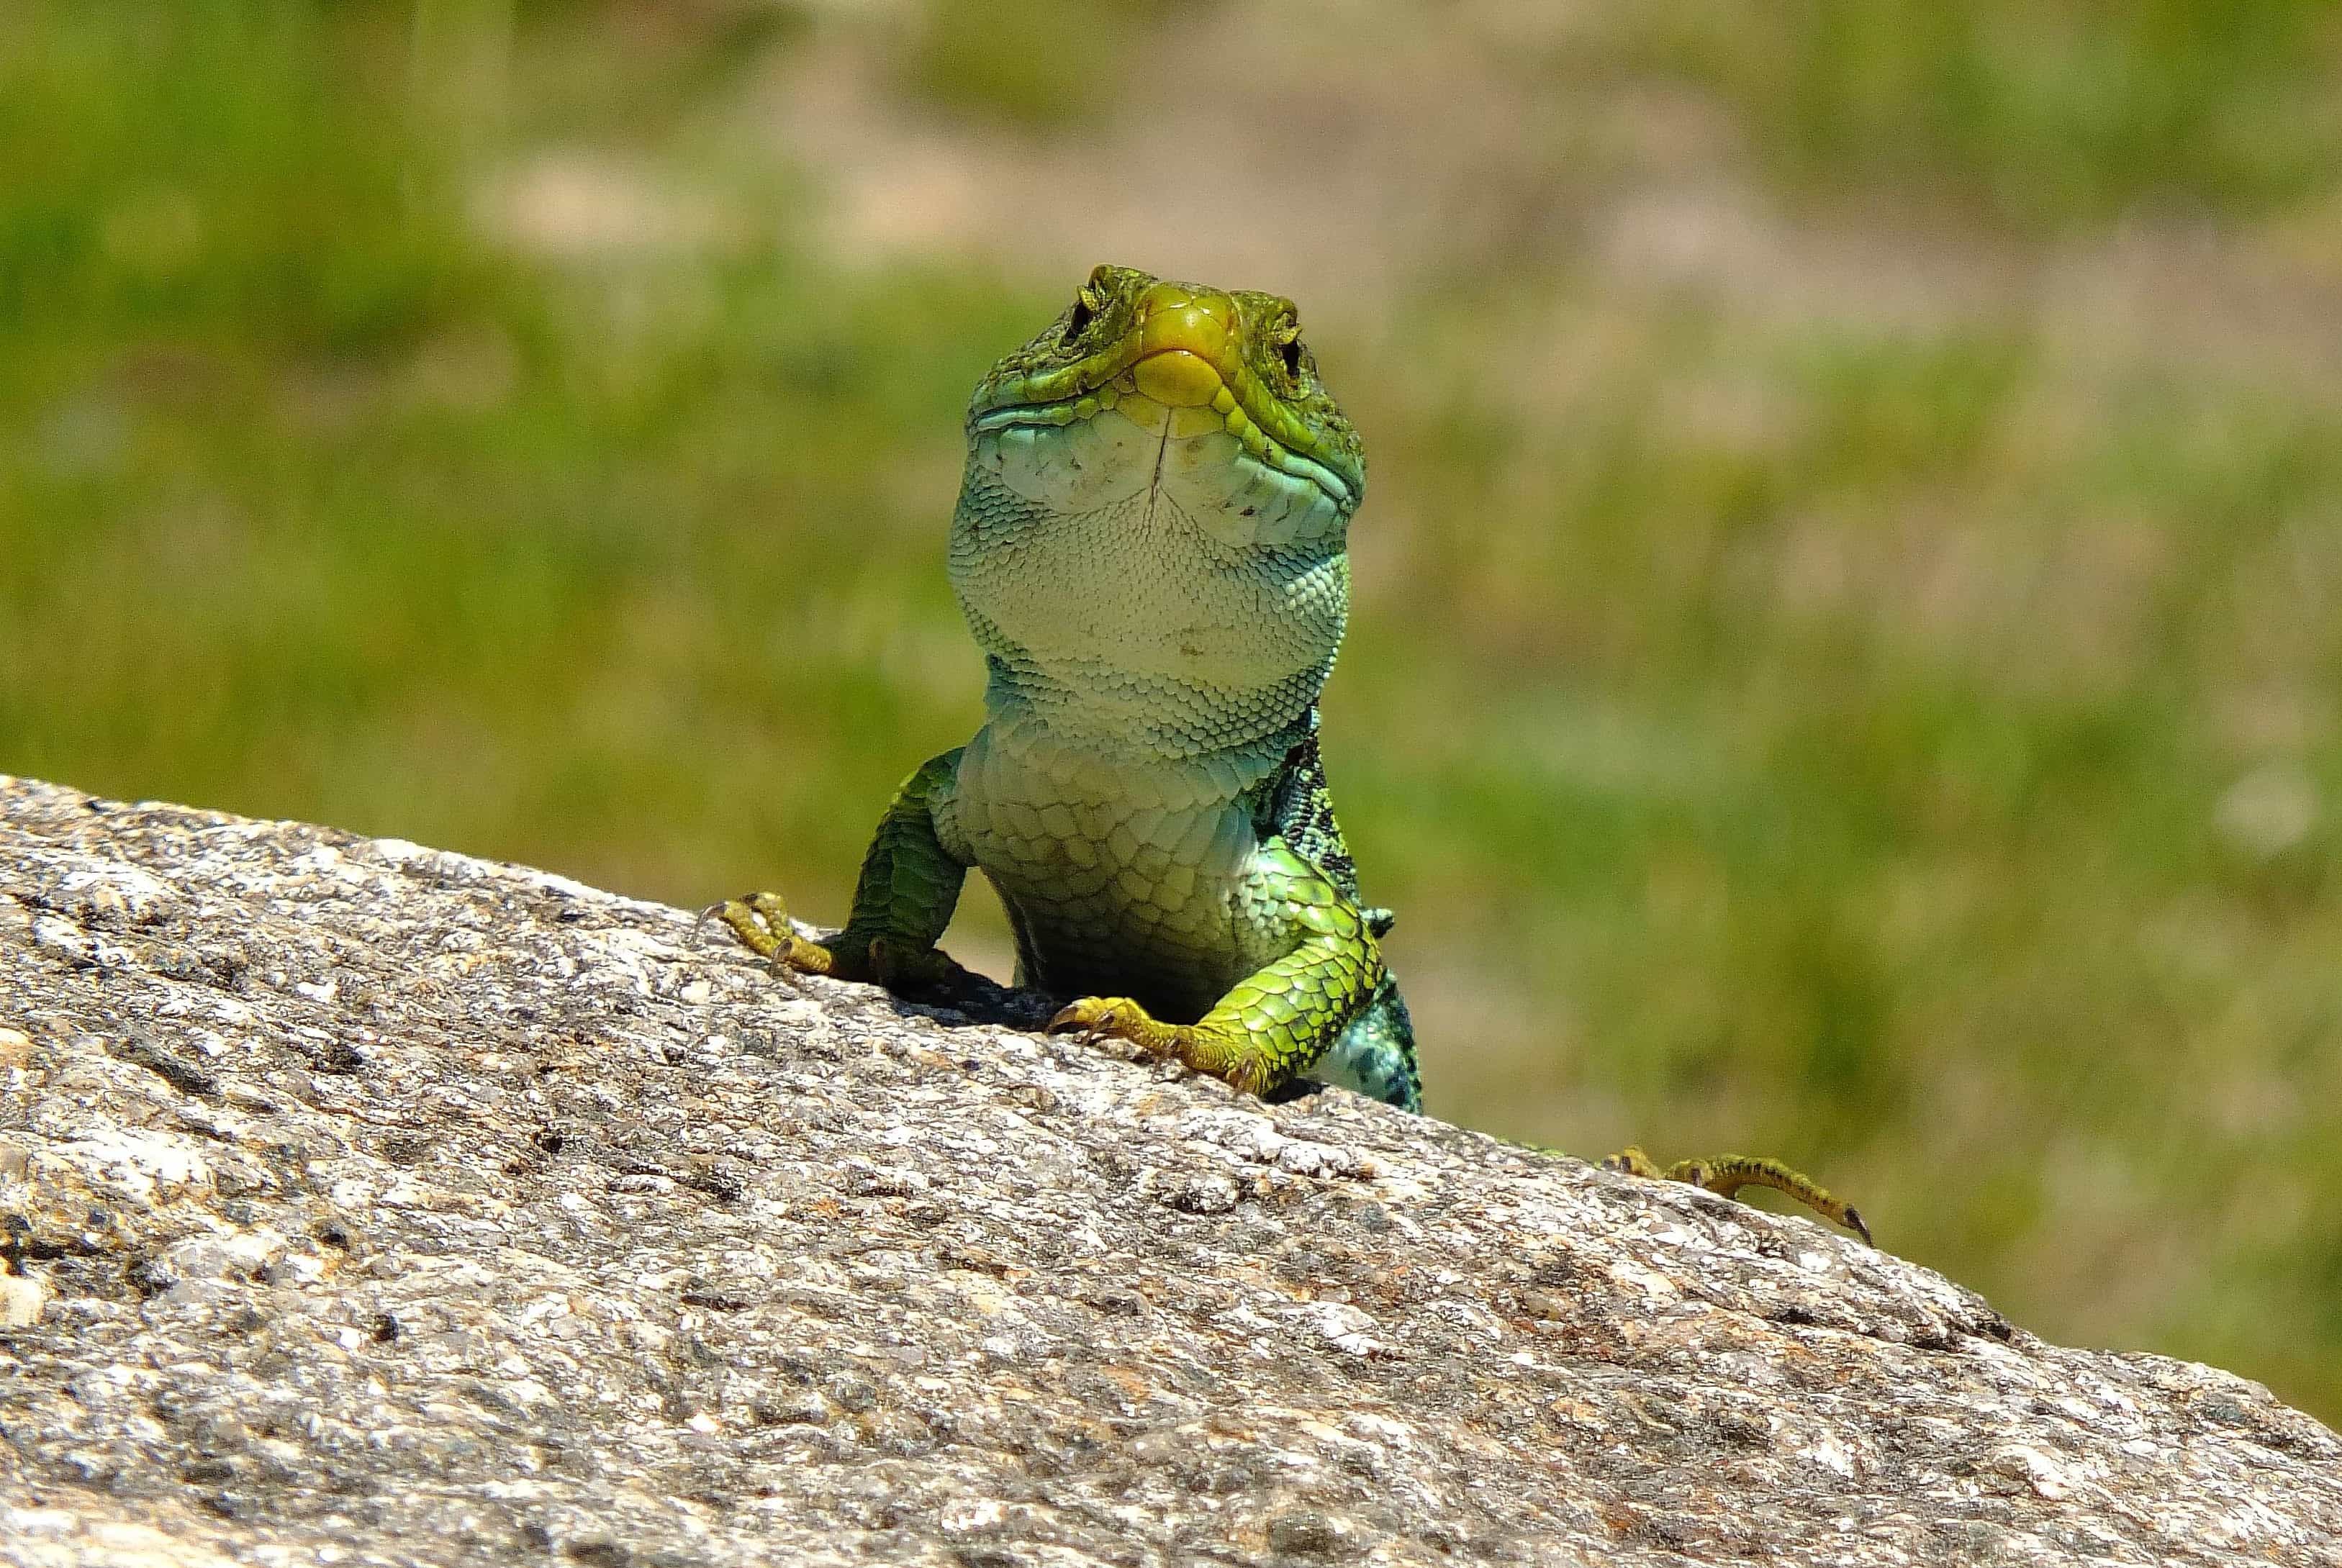 Free Picture Nature Wildlife Animal Lizard Reptile Zoology